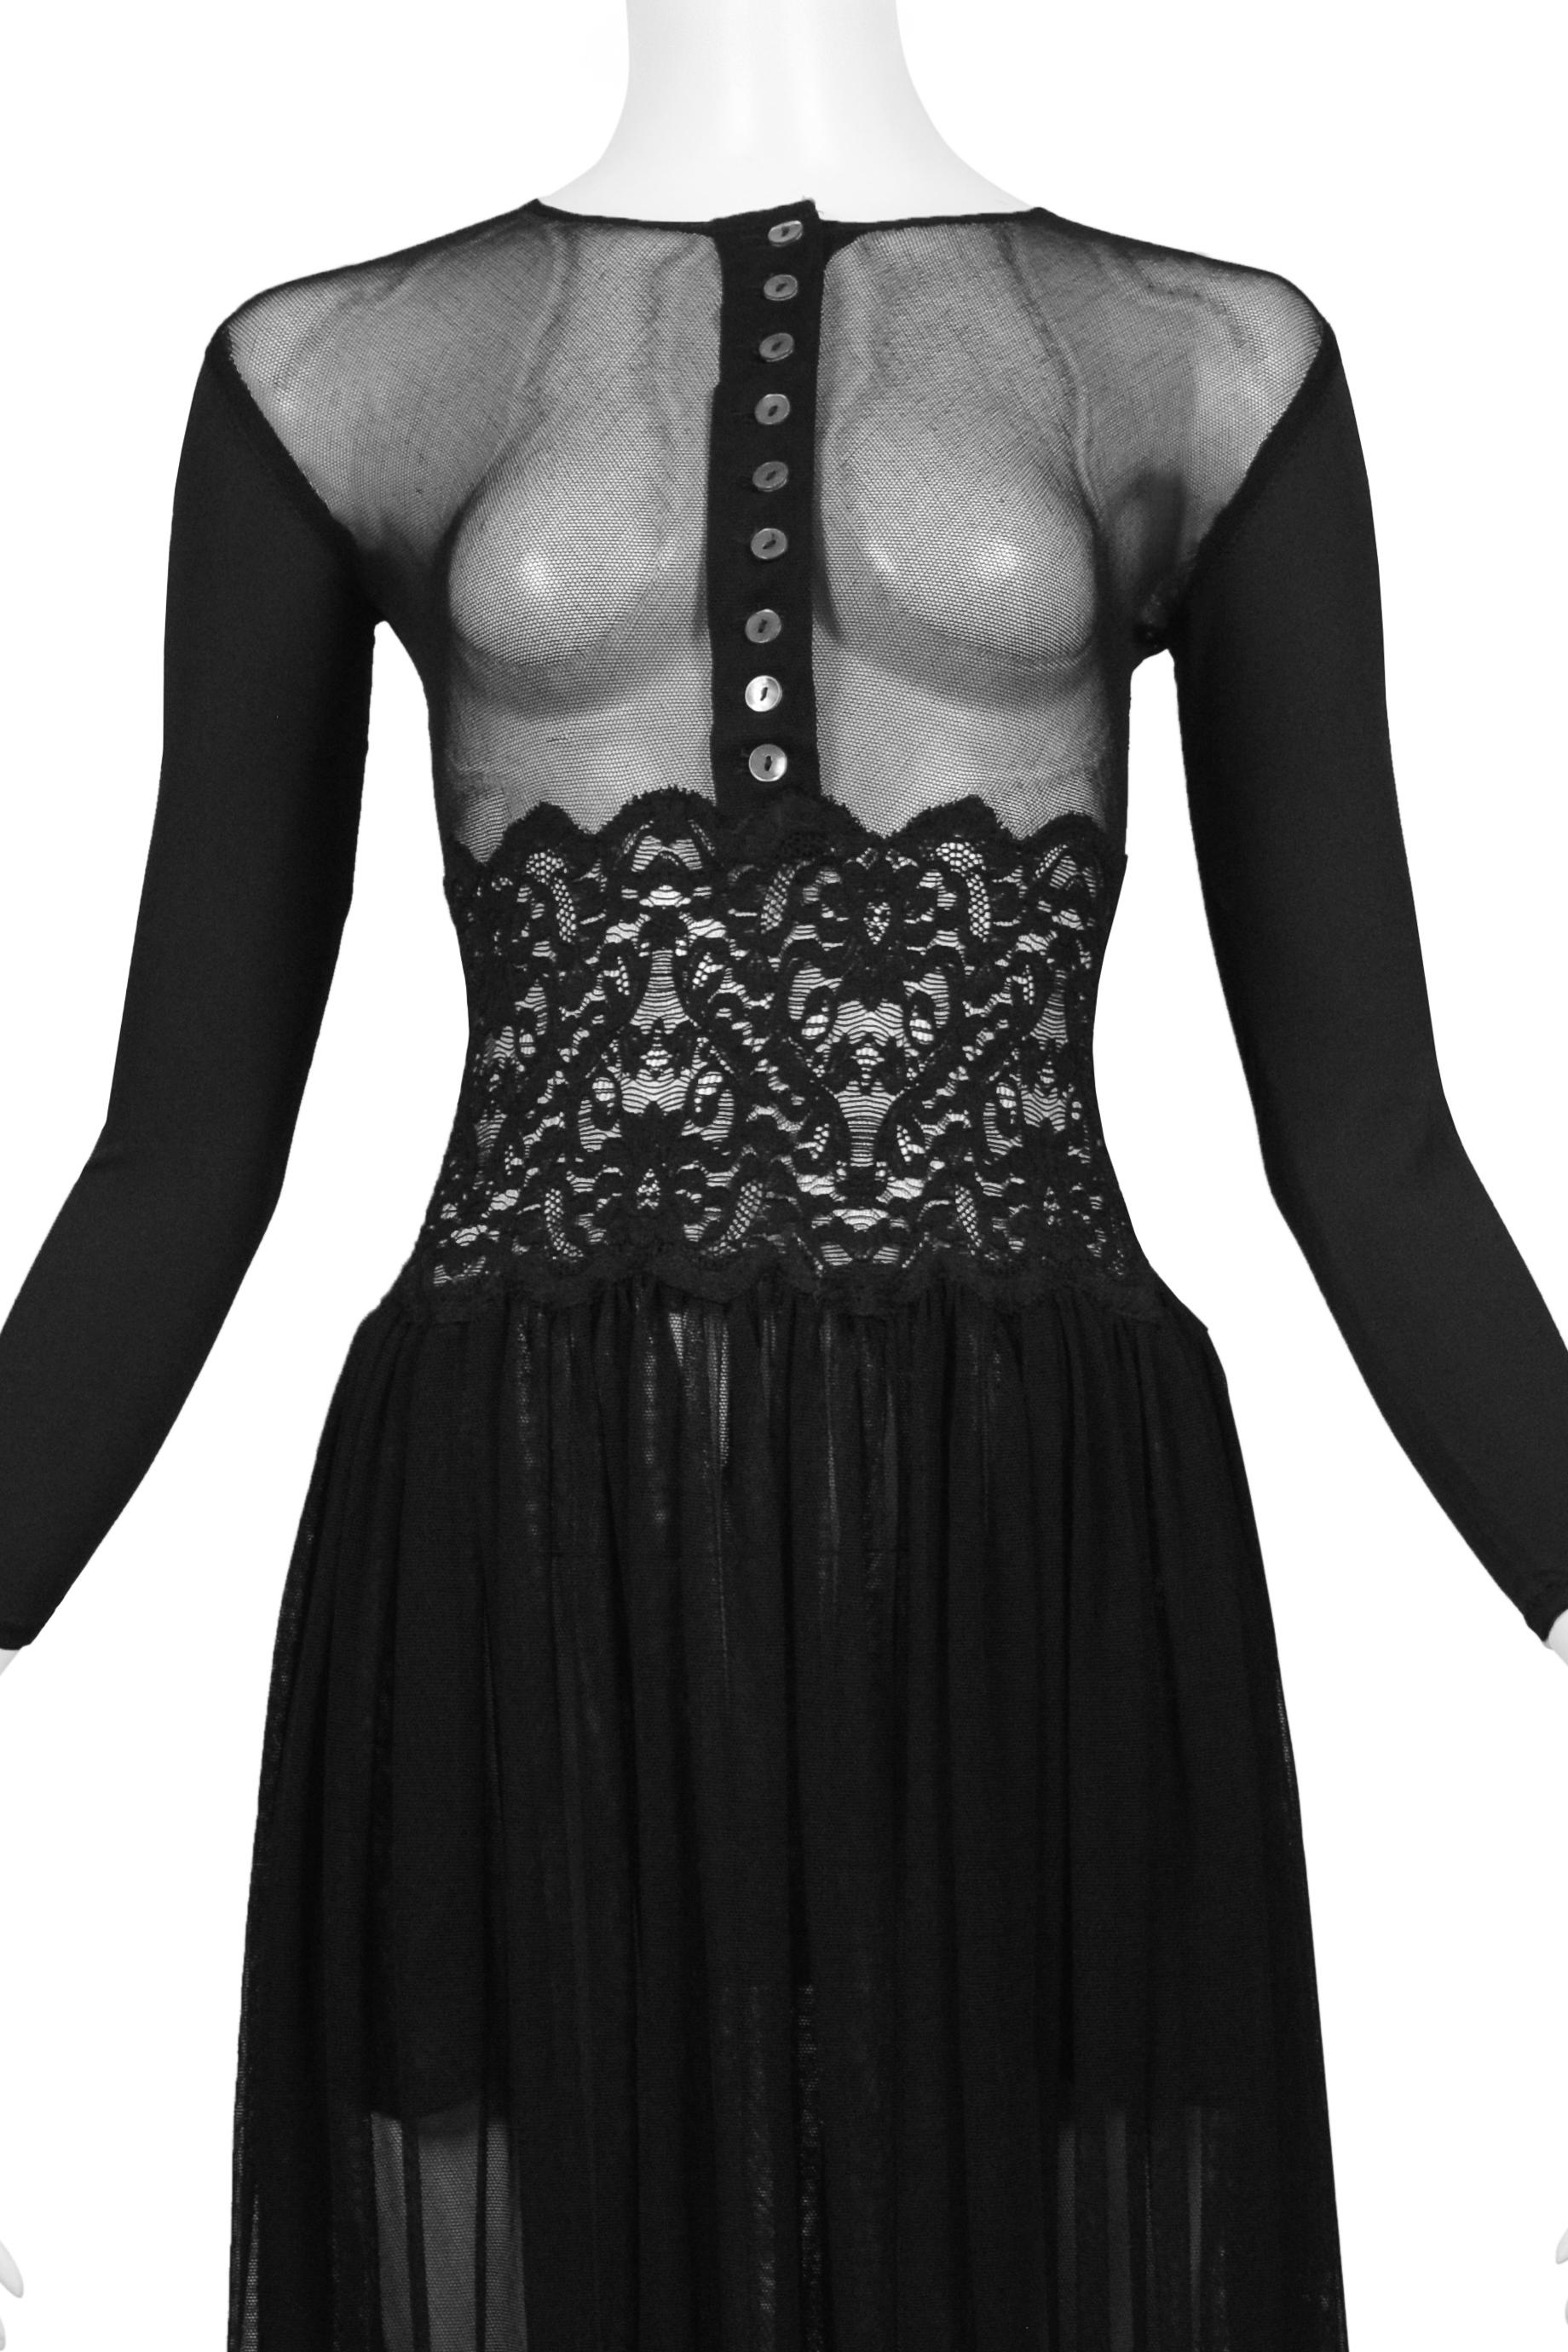 Jean Paul Gaultier Black Mesh, Lace And Tulle Ballet Dress 1988 In Excellent Condition For Sale In Los Angeles, CA